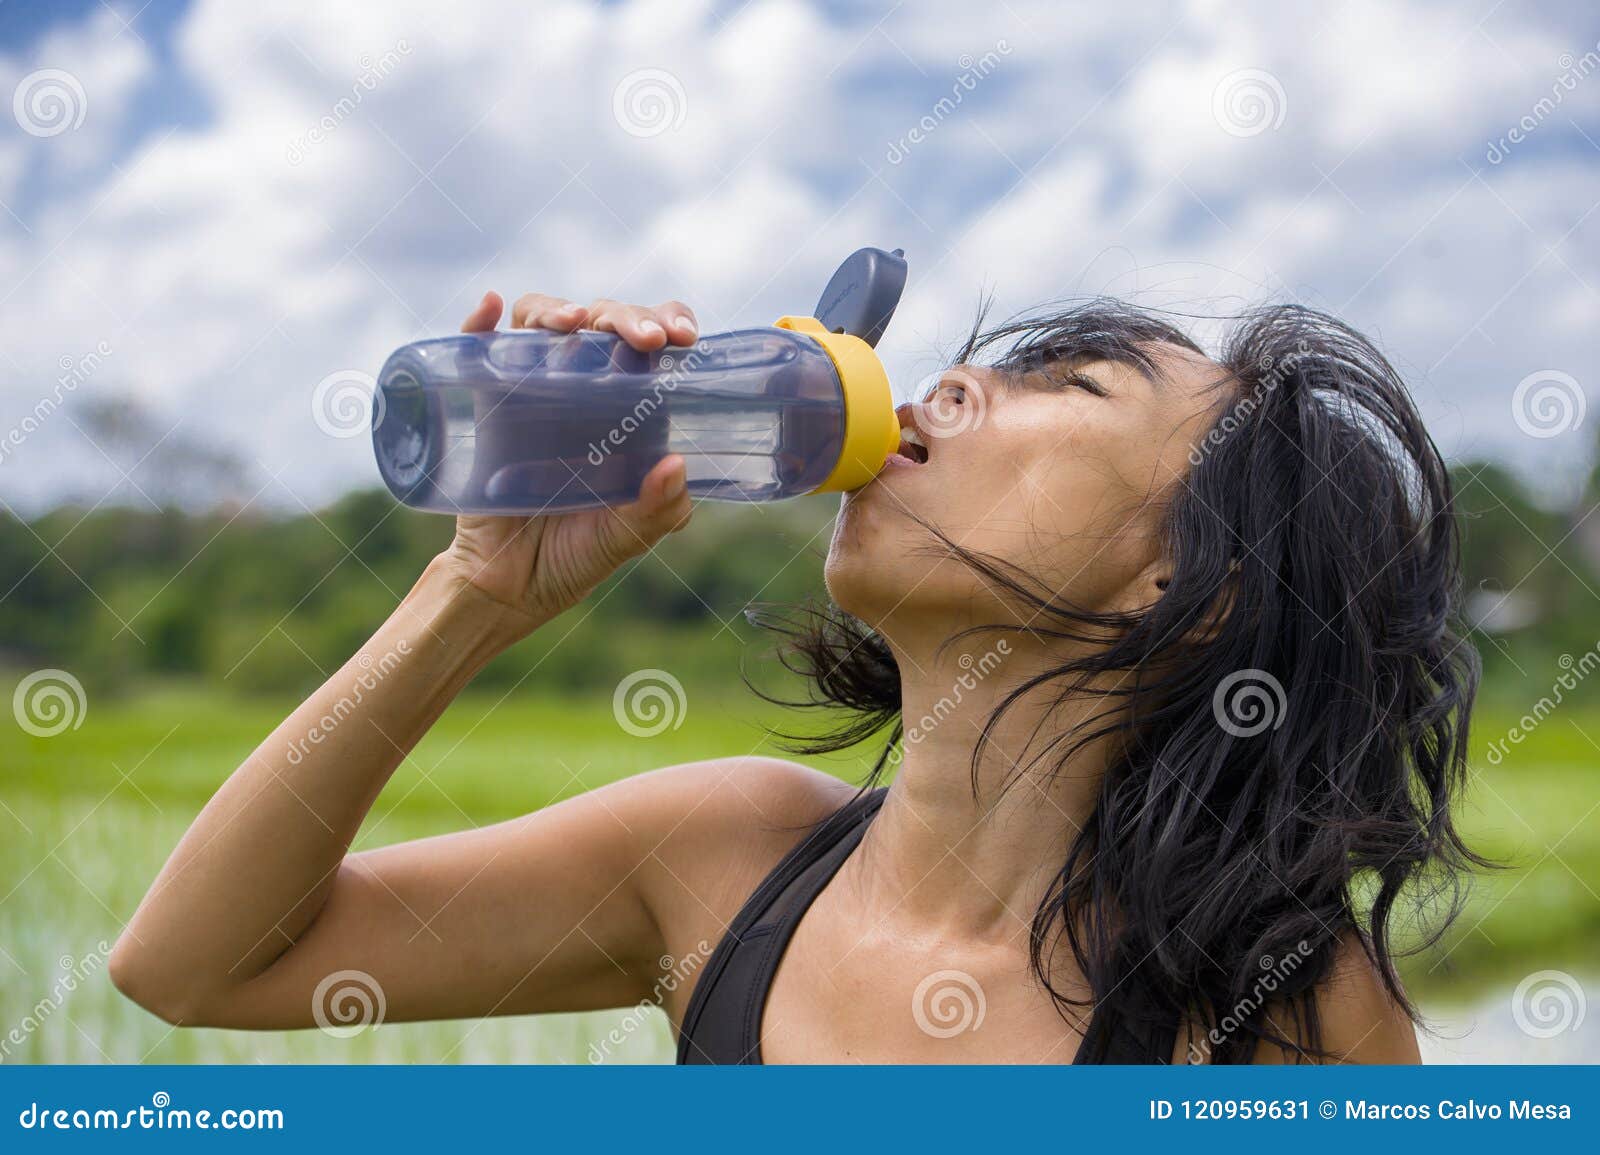 https://thumbs.dreamstime.com/z/young-healthy-sporty-asian-chinese-woman-drinking-water-bottle-fitness-training-running-workout-outdoors-green-field-120959631.jpg